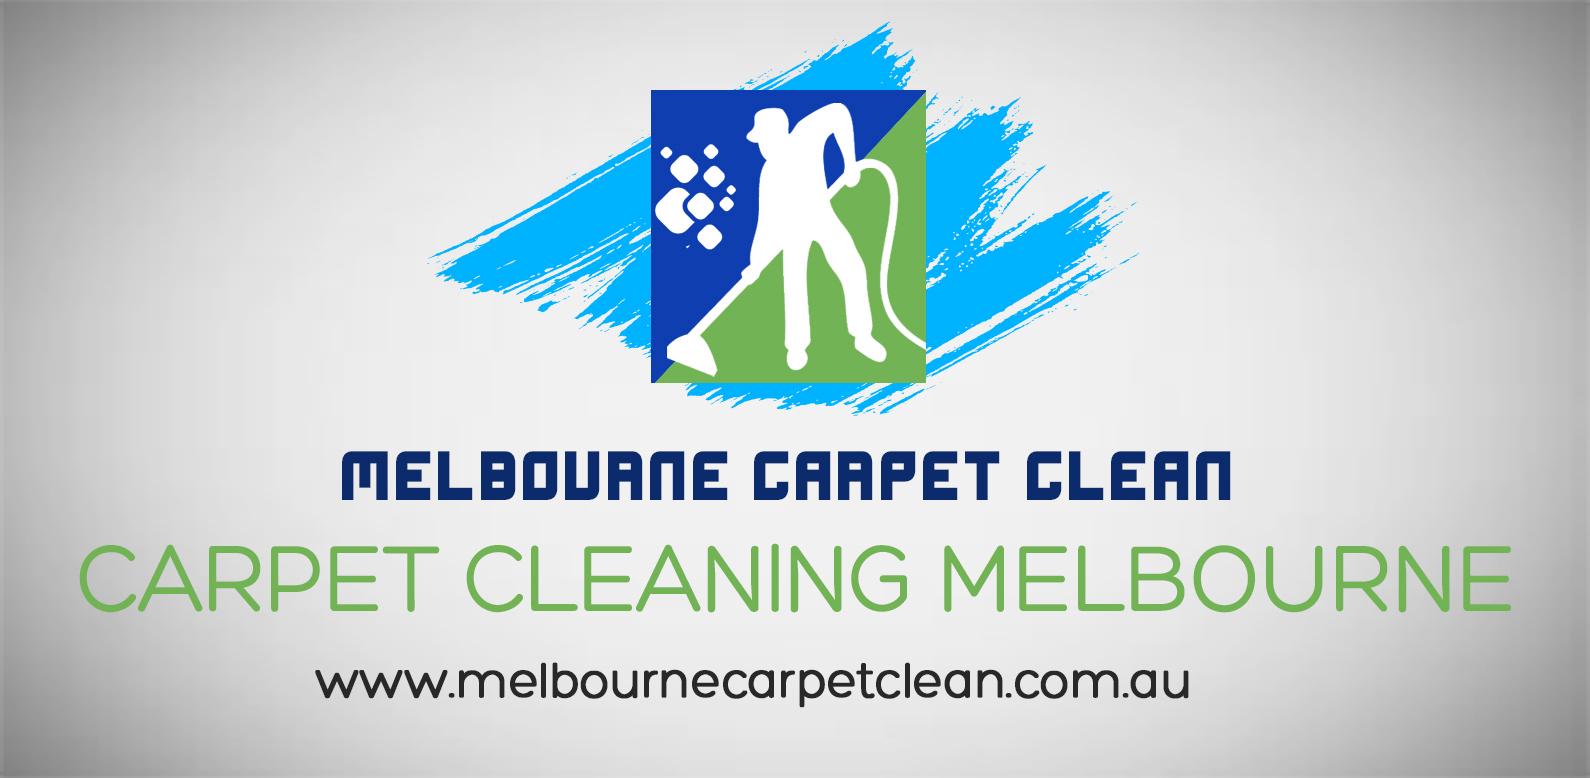 Carpet cleaning melbourne